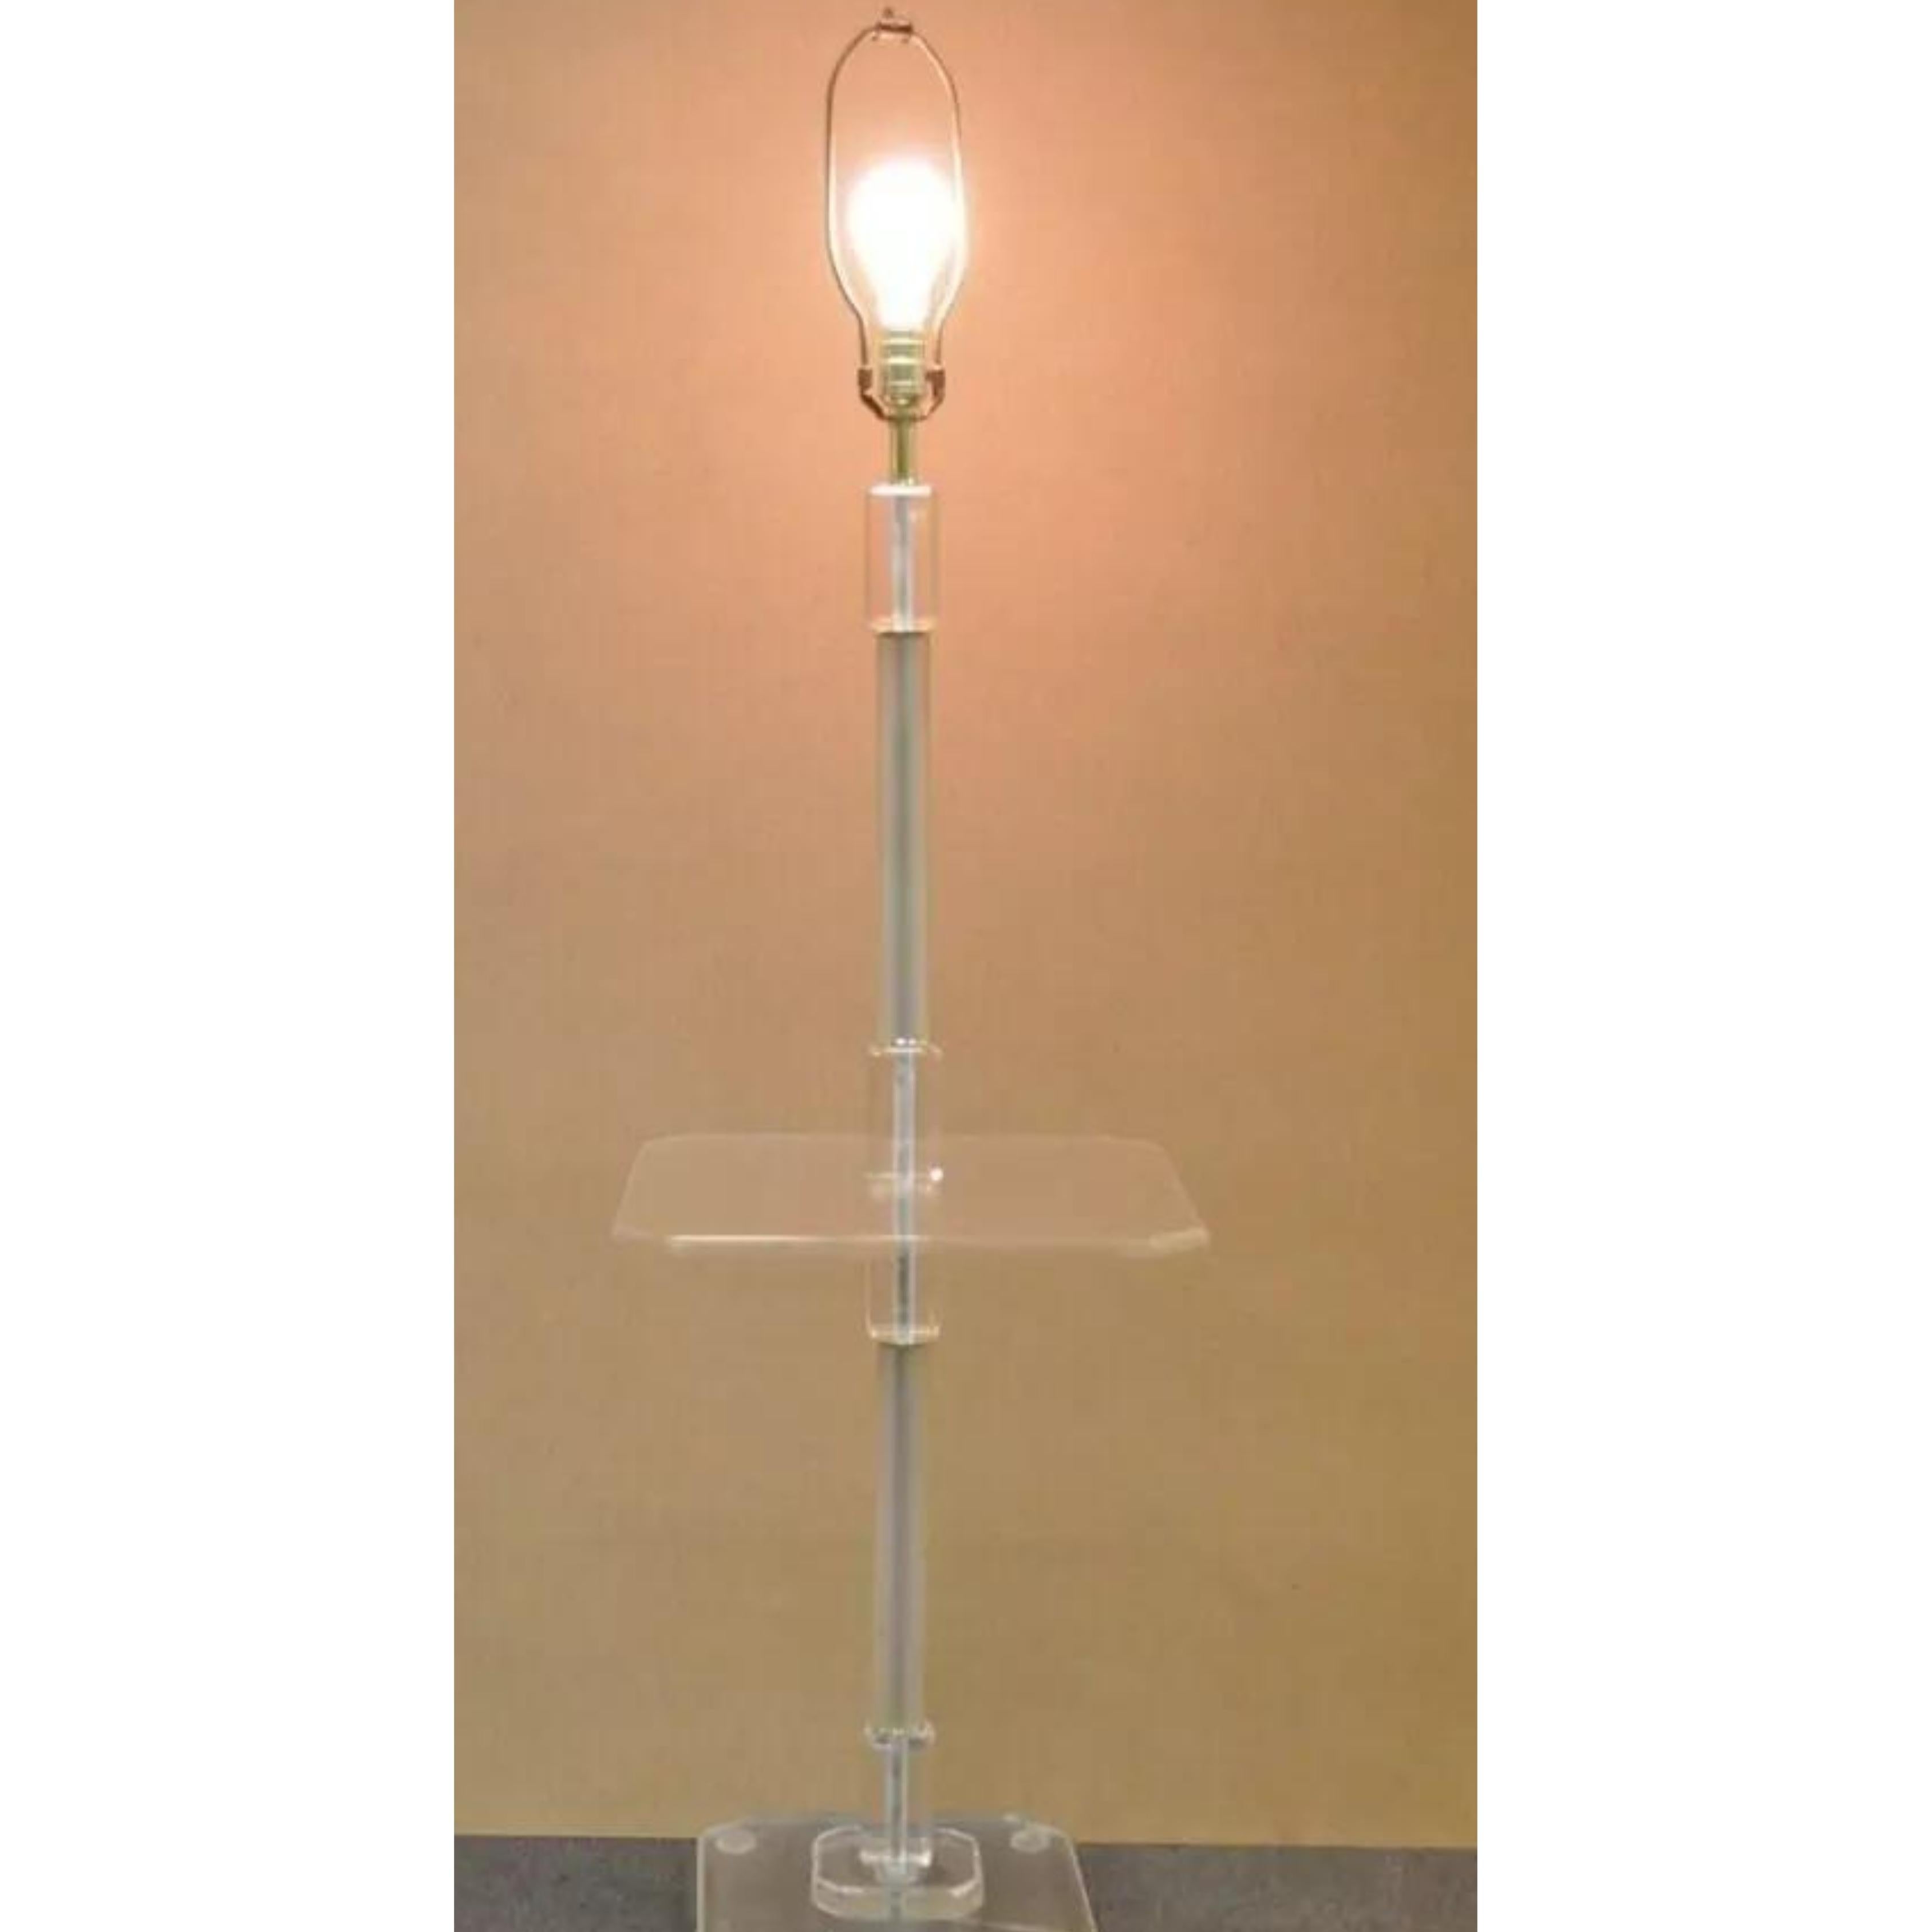 Vintage Mid Century Modern Clear Lucite Occasional Accent Floor Lamp Side Table. Item features a substantial lucite base and table surface with frosted lucite column. Wired for use with a 3-way bulb. Circa Mid 20th Century. Measurements: 55.5